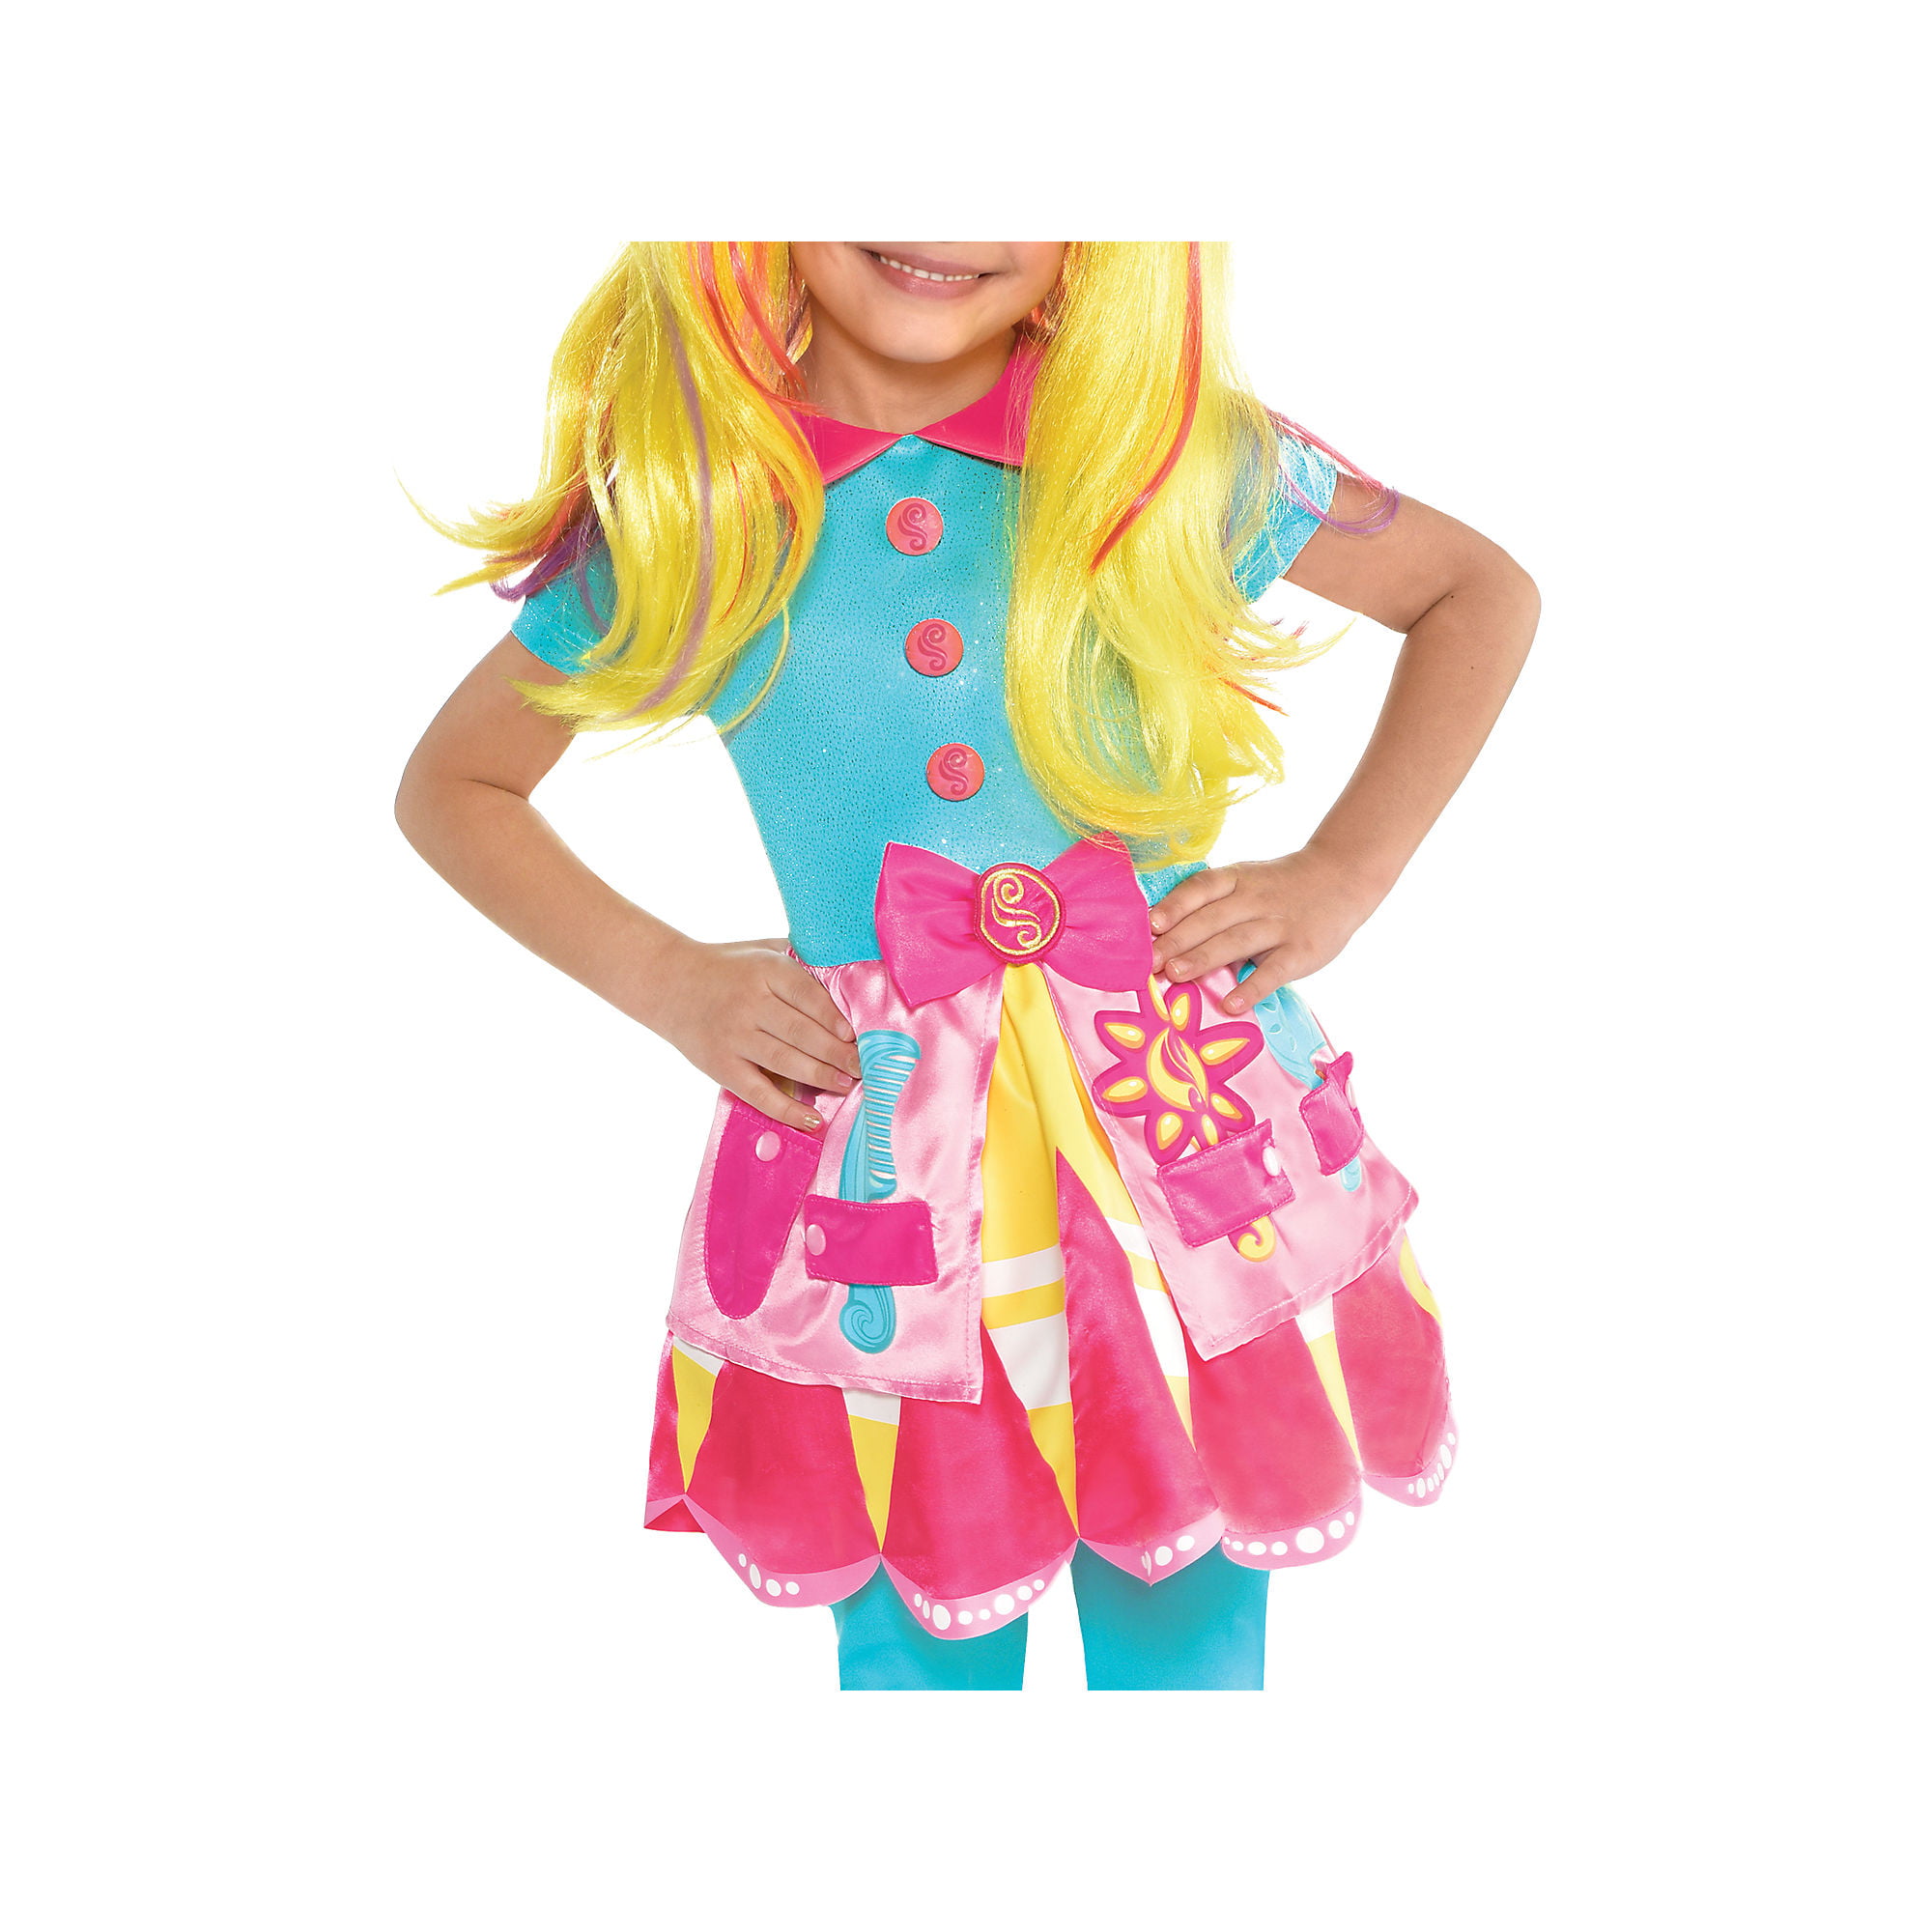 Amscan Sunny Day Sunny Halloween Costume for Toddler Girls Small with Included Accessories